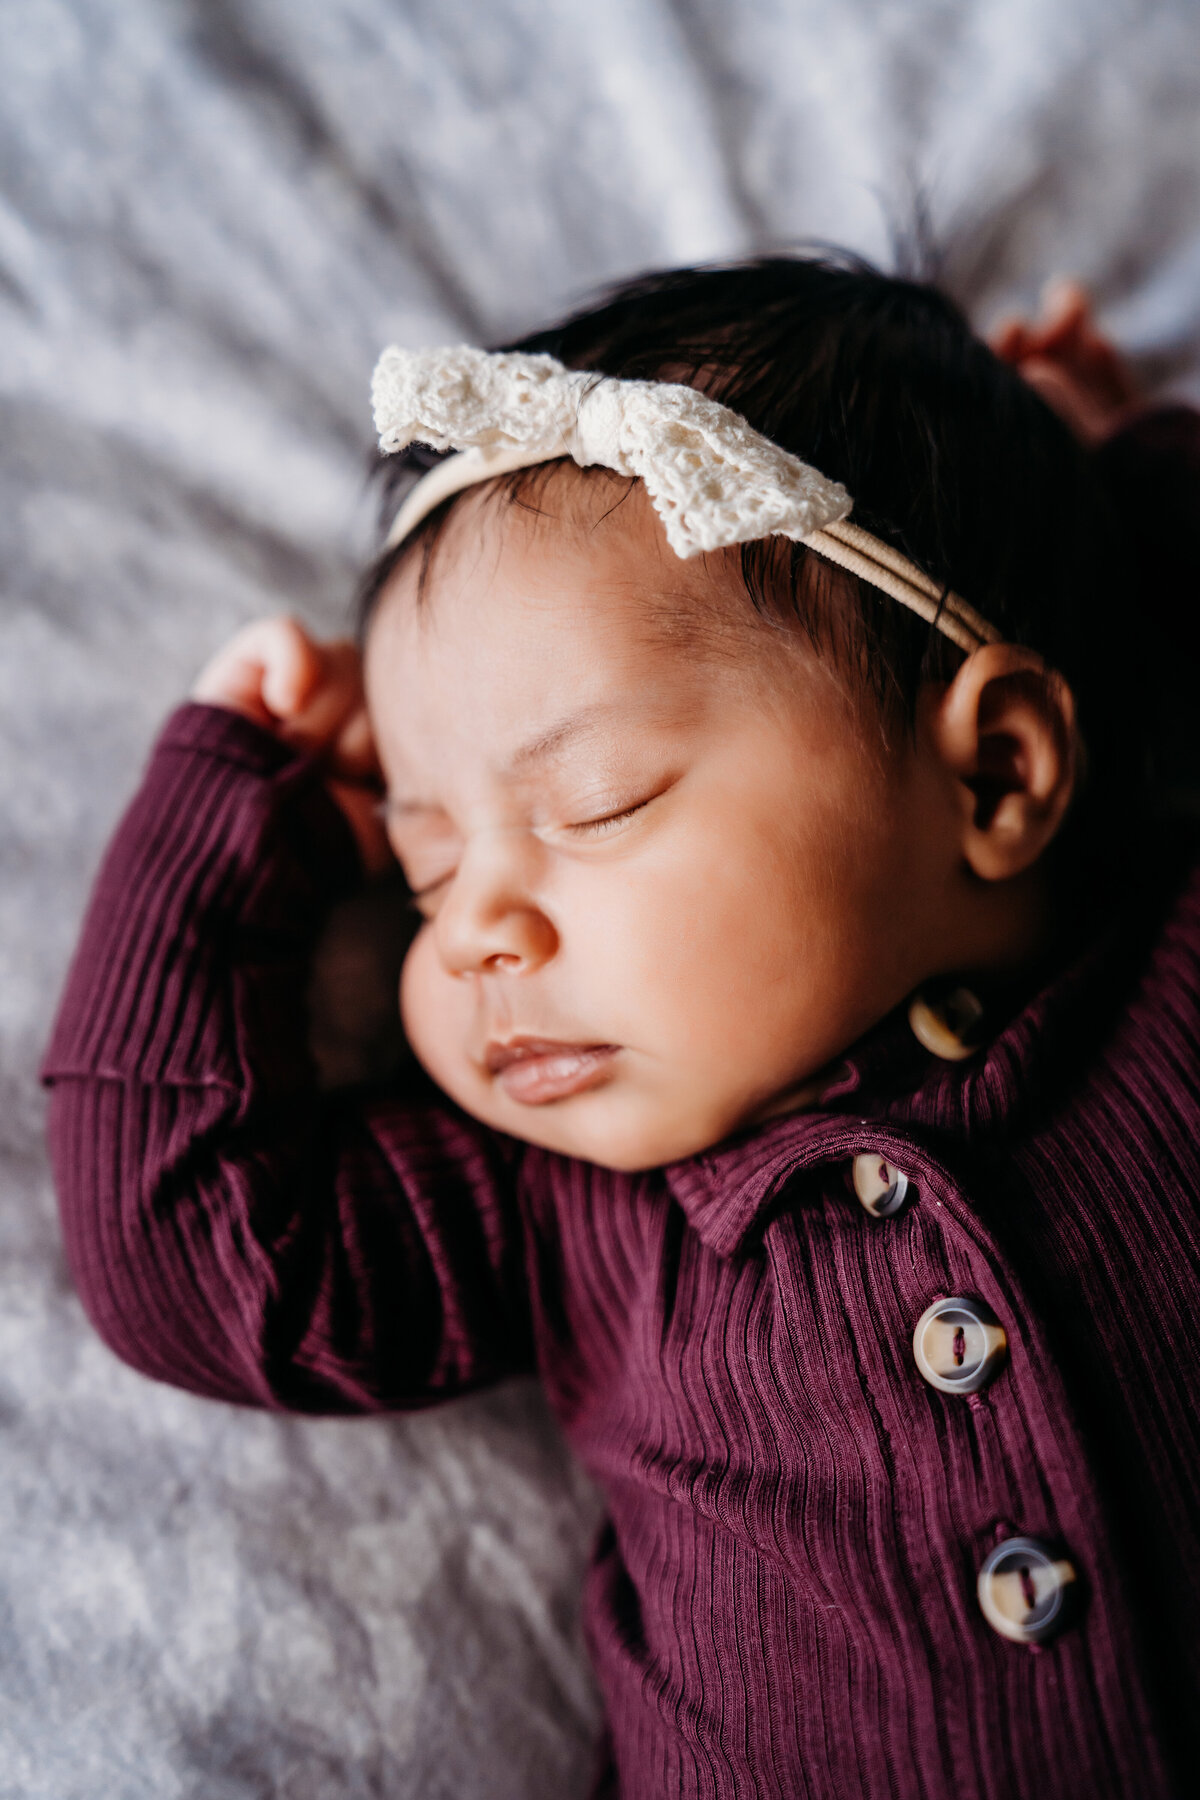 Newborn Photographer, a baby girl sleeps on her bed with a bow in her hair